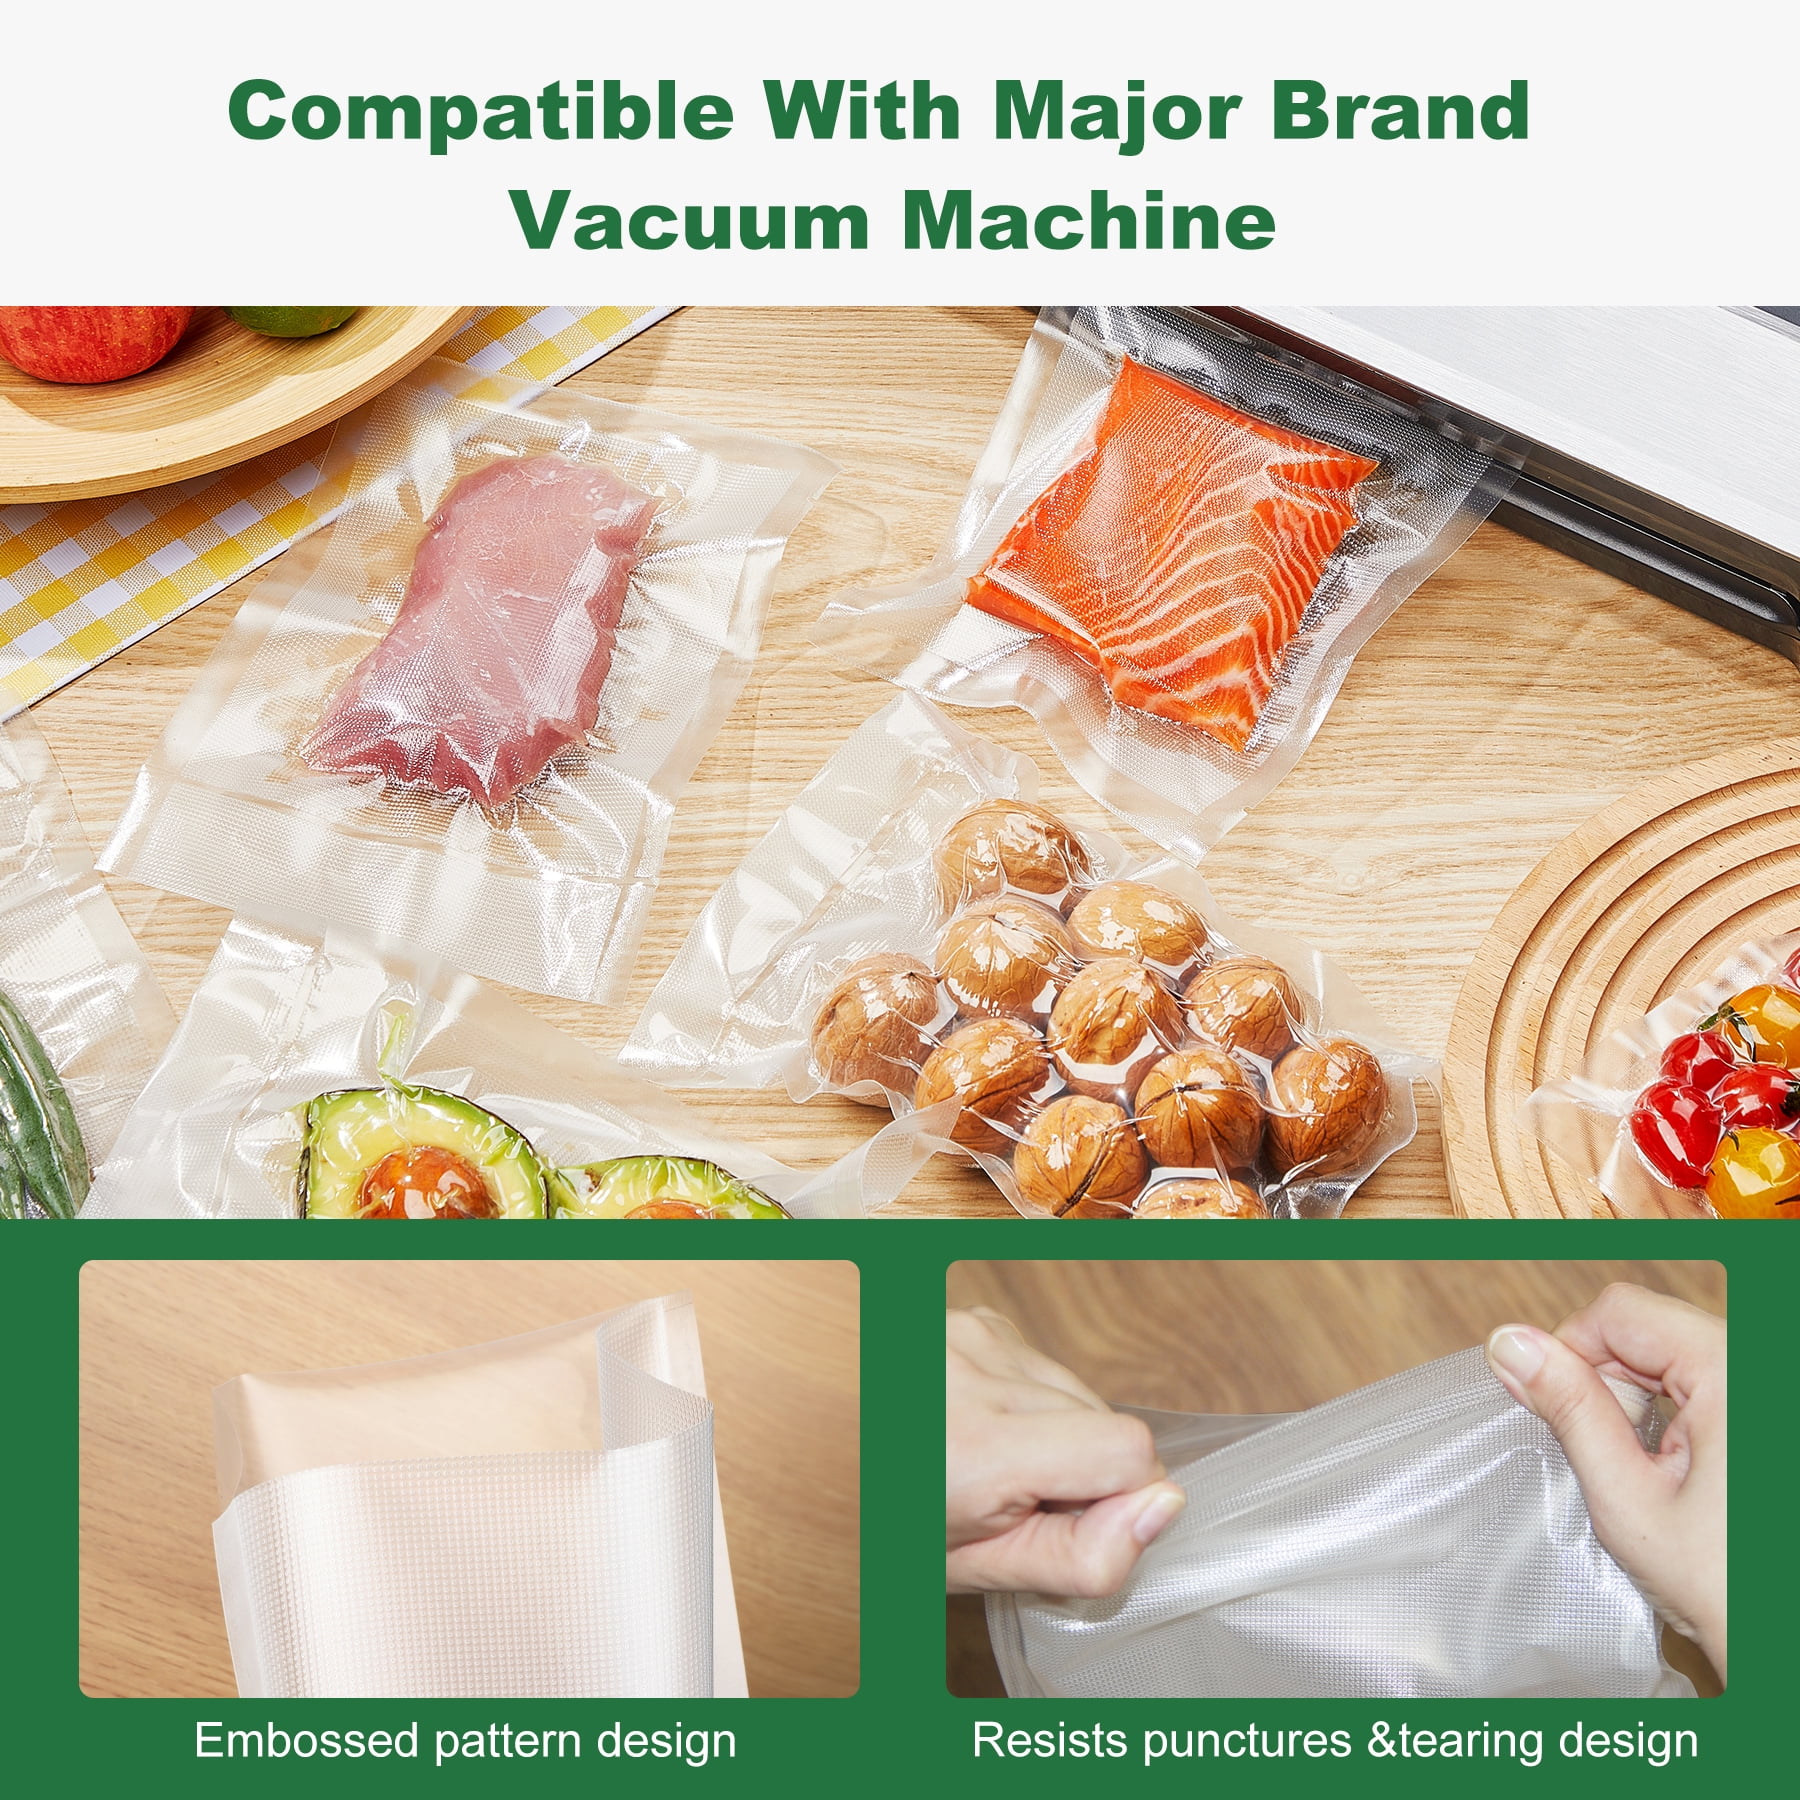 8'*10' Vacuum Food Sealer Bags for Sous Vide, Pre-Cut Textured Vacuum Bags  for Food Packaging, Safe for Freezer, Refrigerator, Frozen Bag 20X25cm -  China Plastic Food Packaging Bag and Vacuum Storage Bag